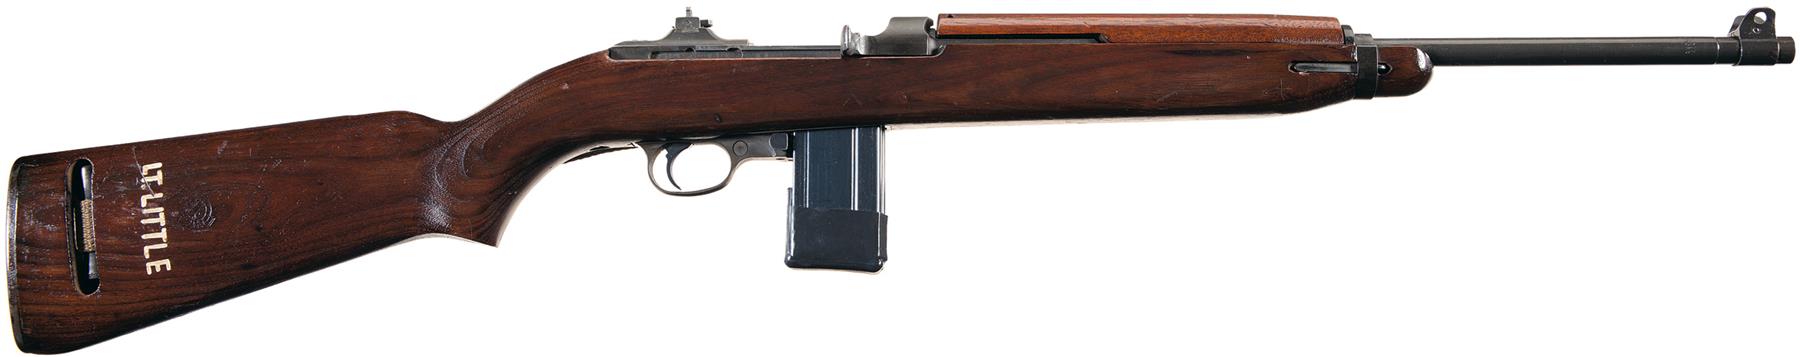 M1 Carbine Serial Number Search